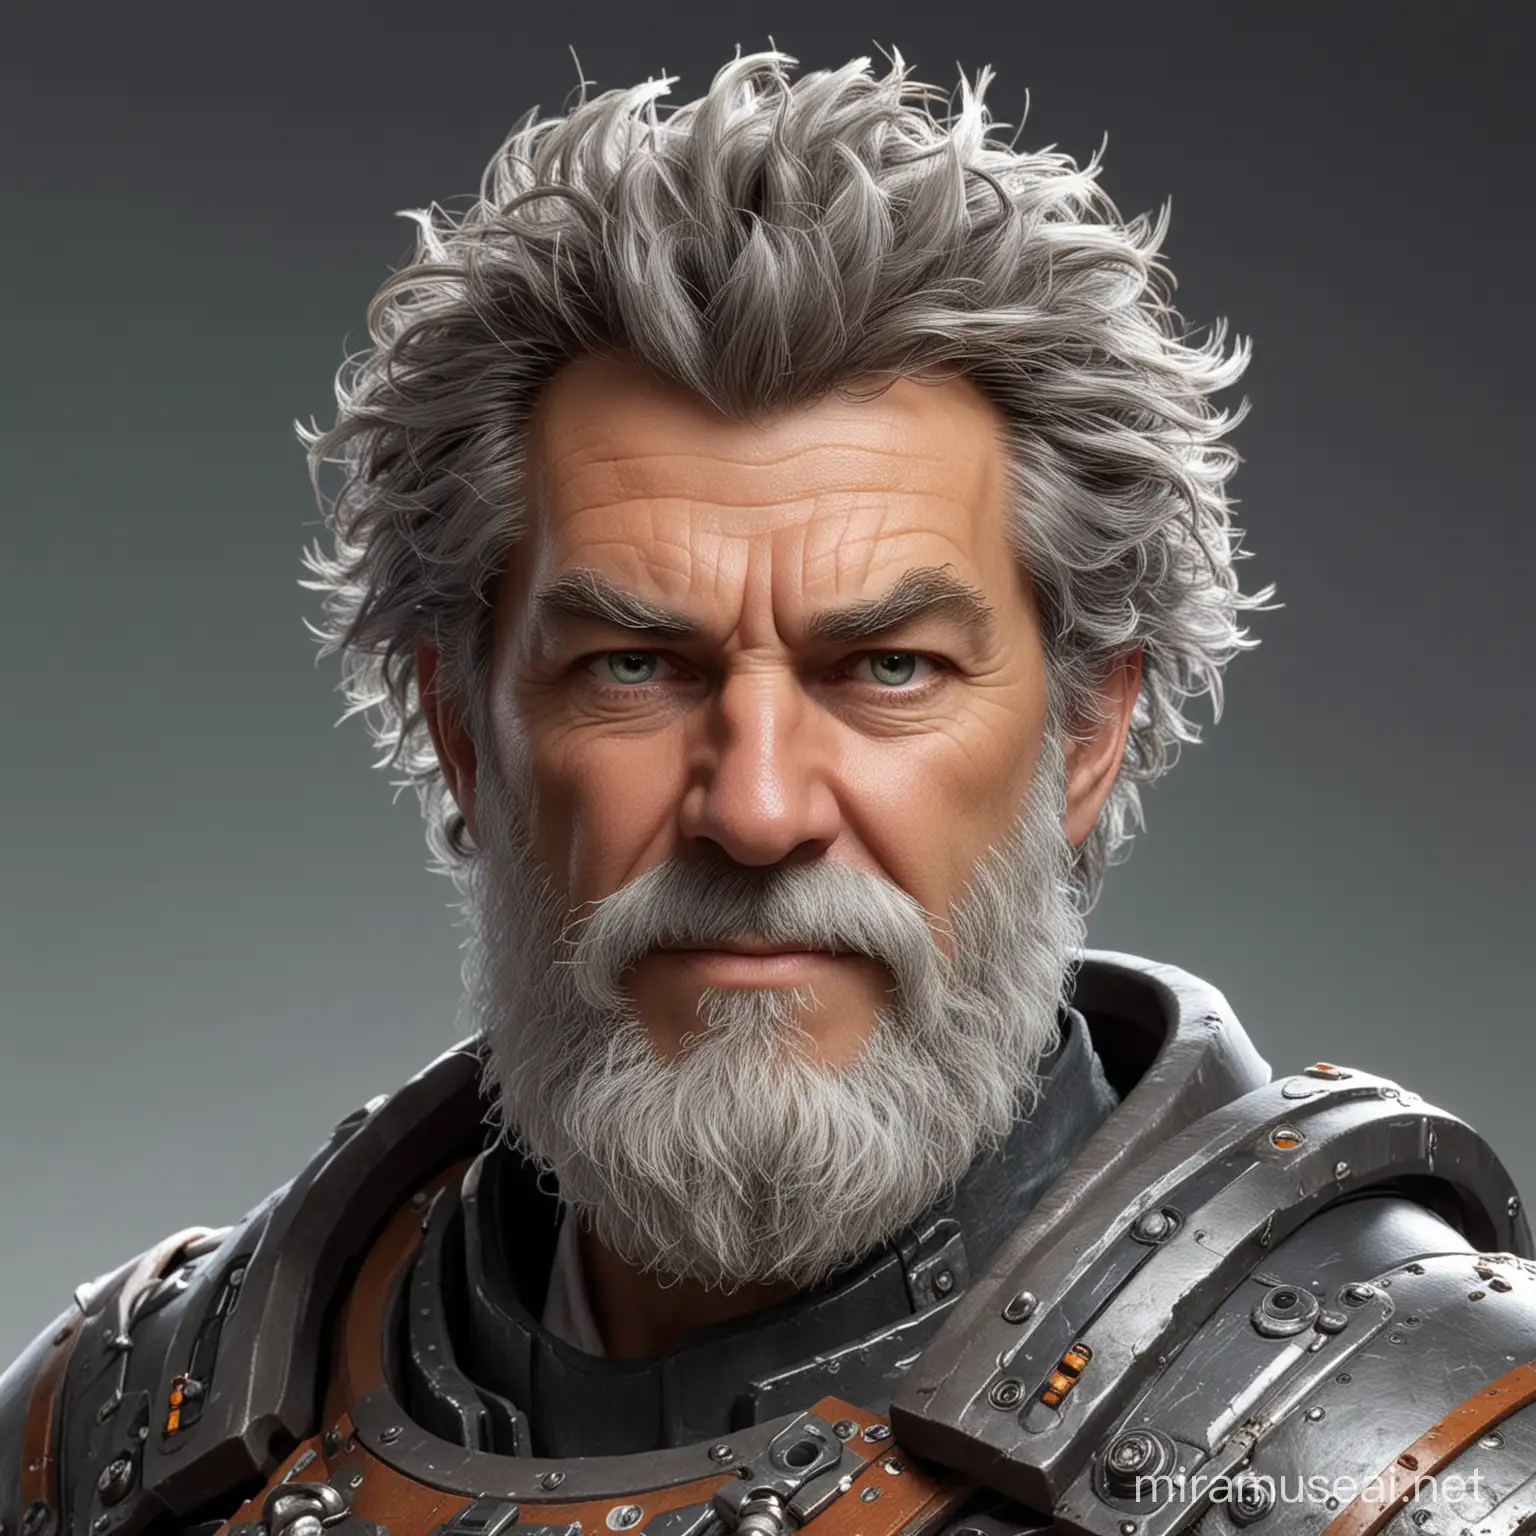 DND Artificer in his 60s. Short, gray, wild hair and bushy beard. Wearing heavy tech armor. Tough expression with a slight grin.